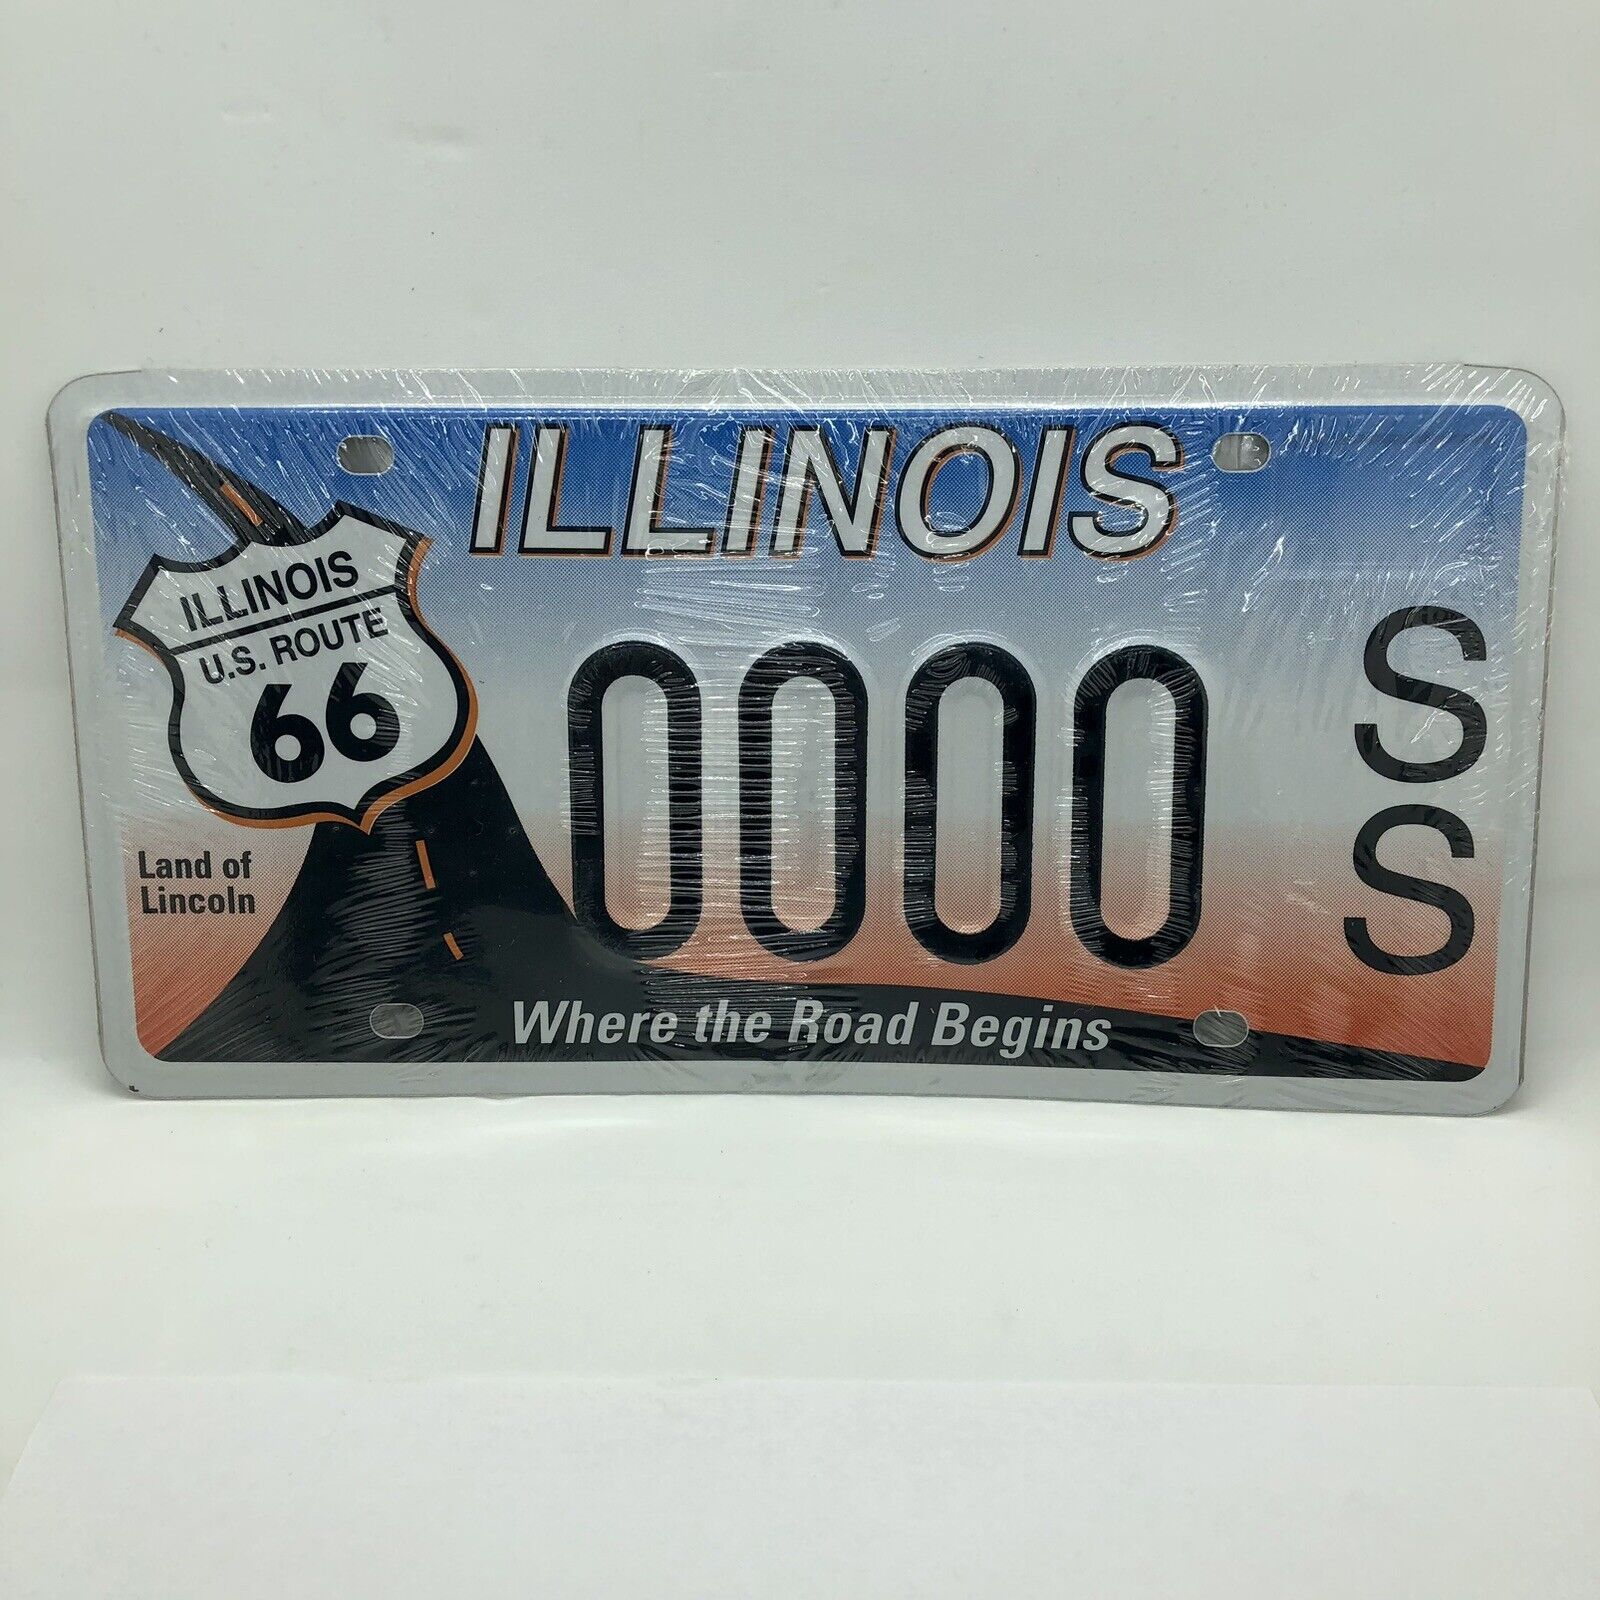 RARE ILLINOIS ROUTE 66 / WHERE THE ROAD BEGINS - SAMPLE LICENSE PLATE - 0000